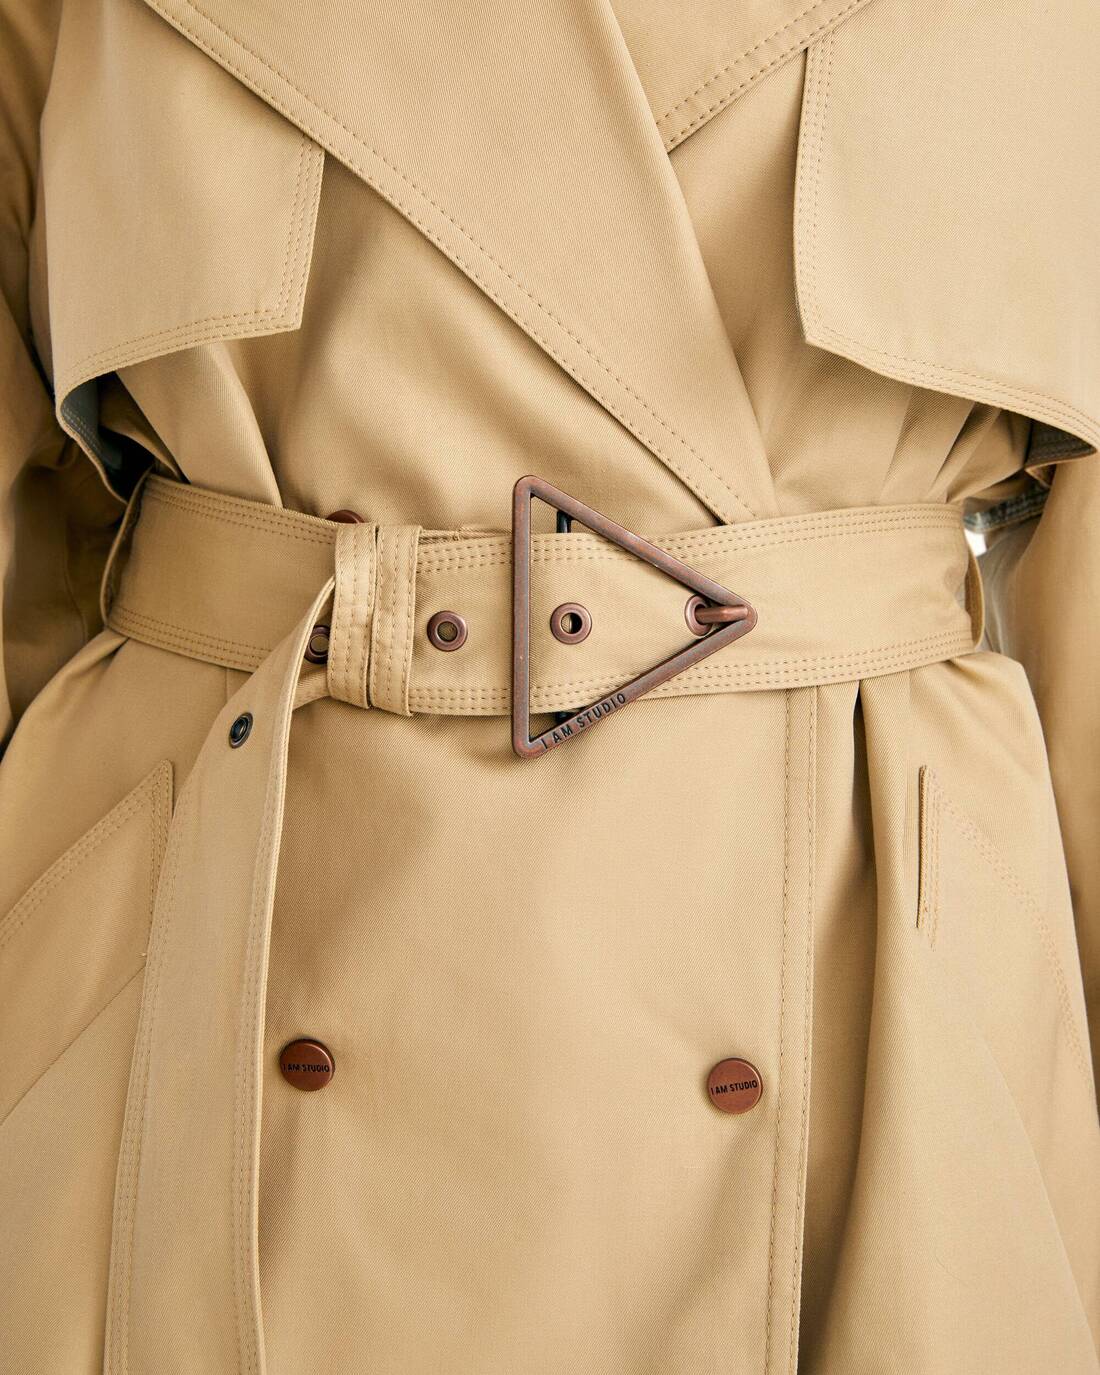 Oversized cropped trench coat